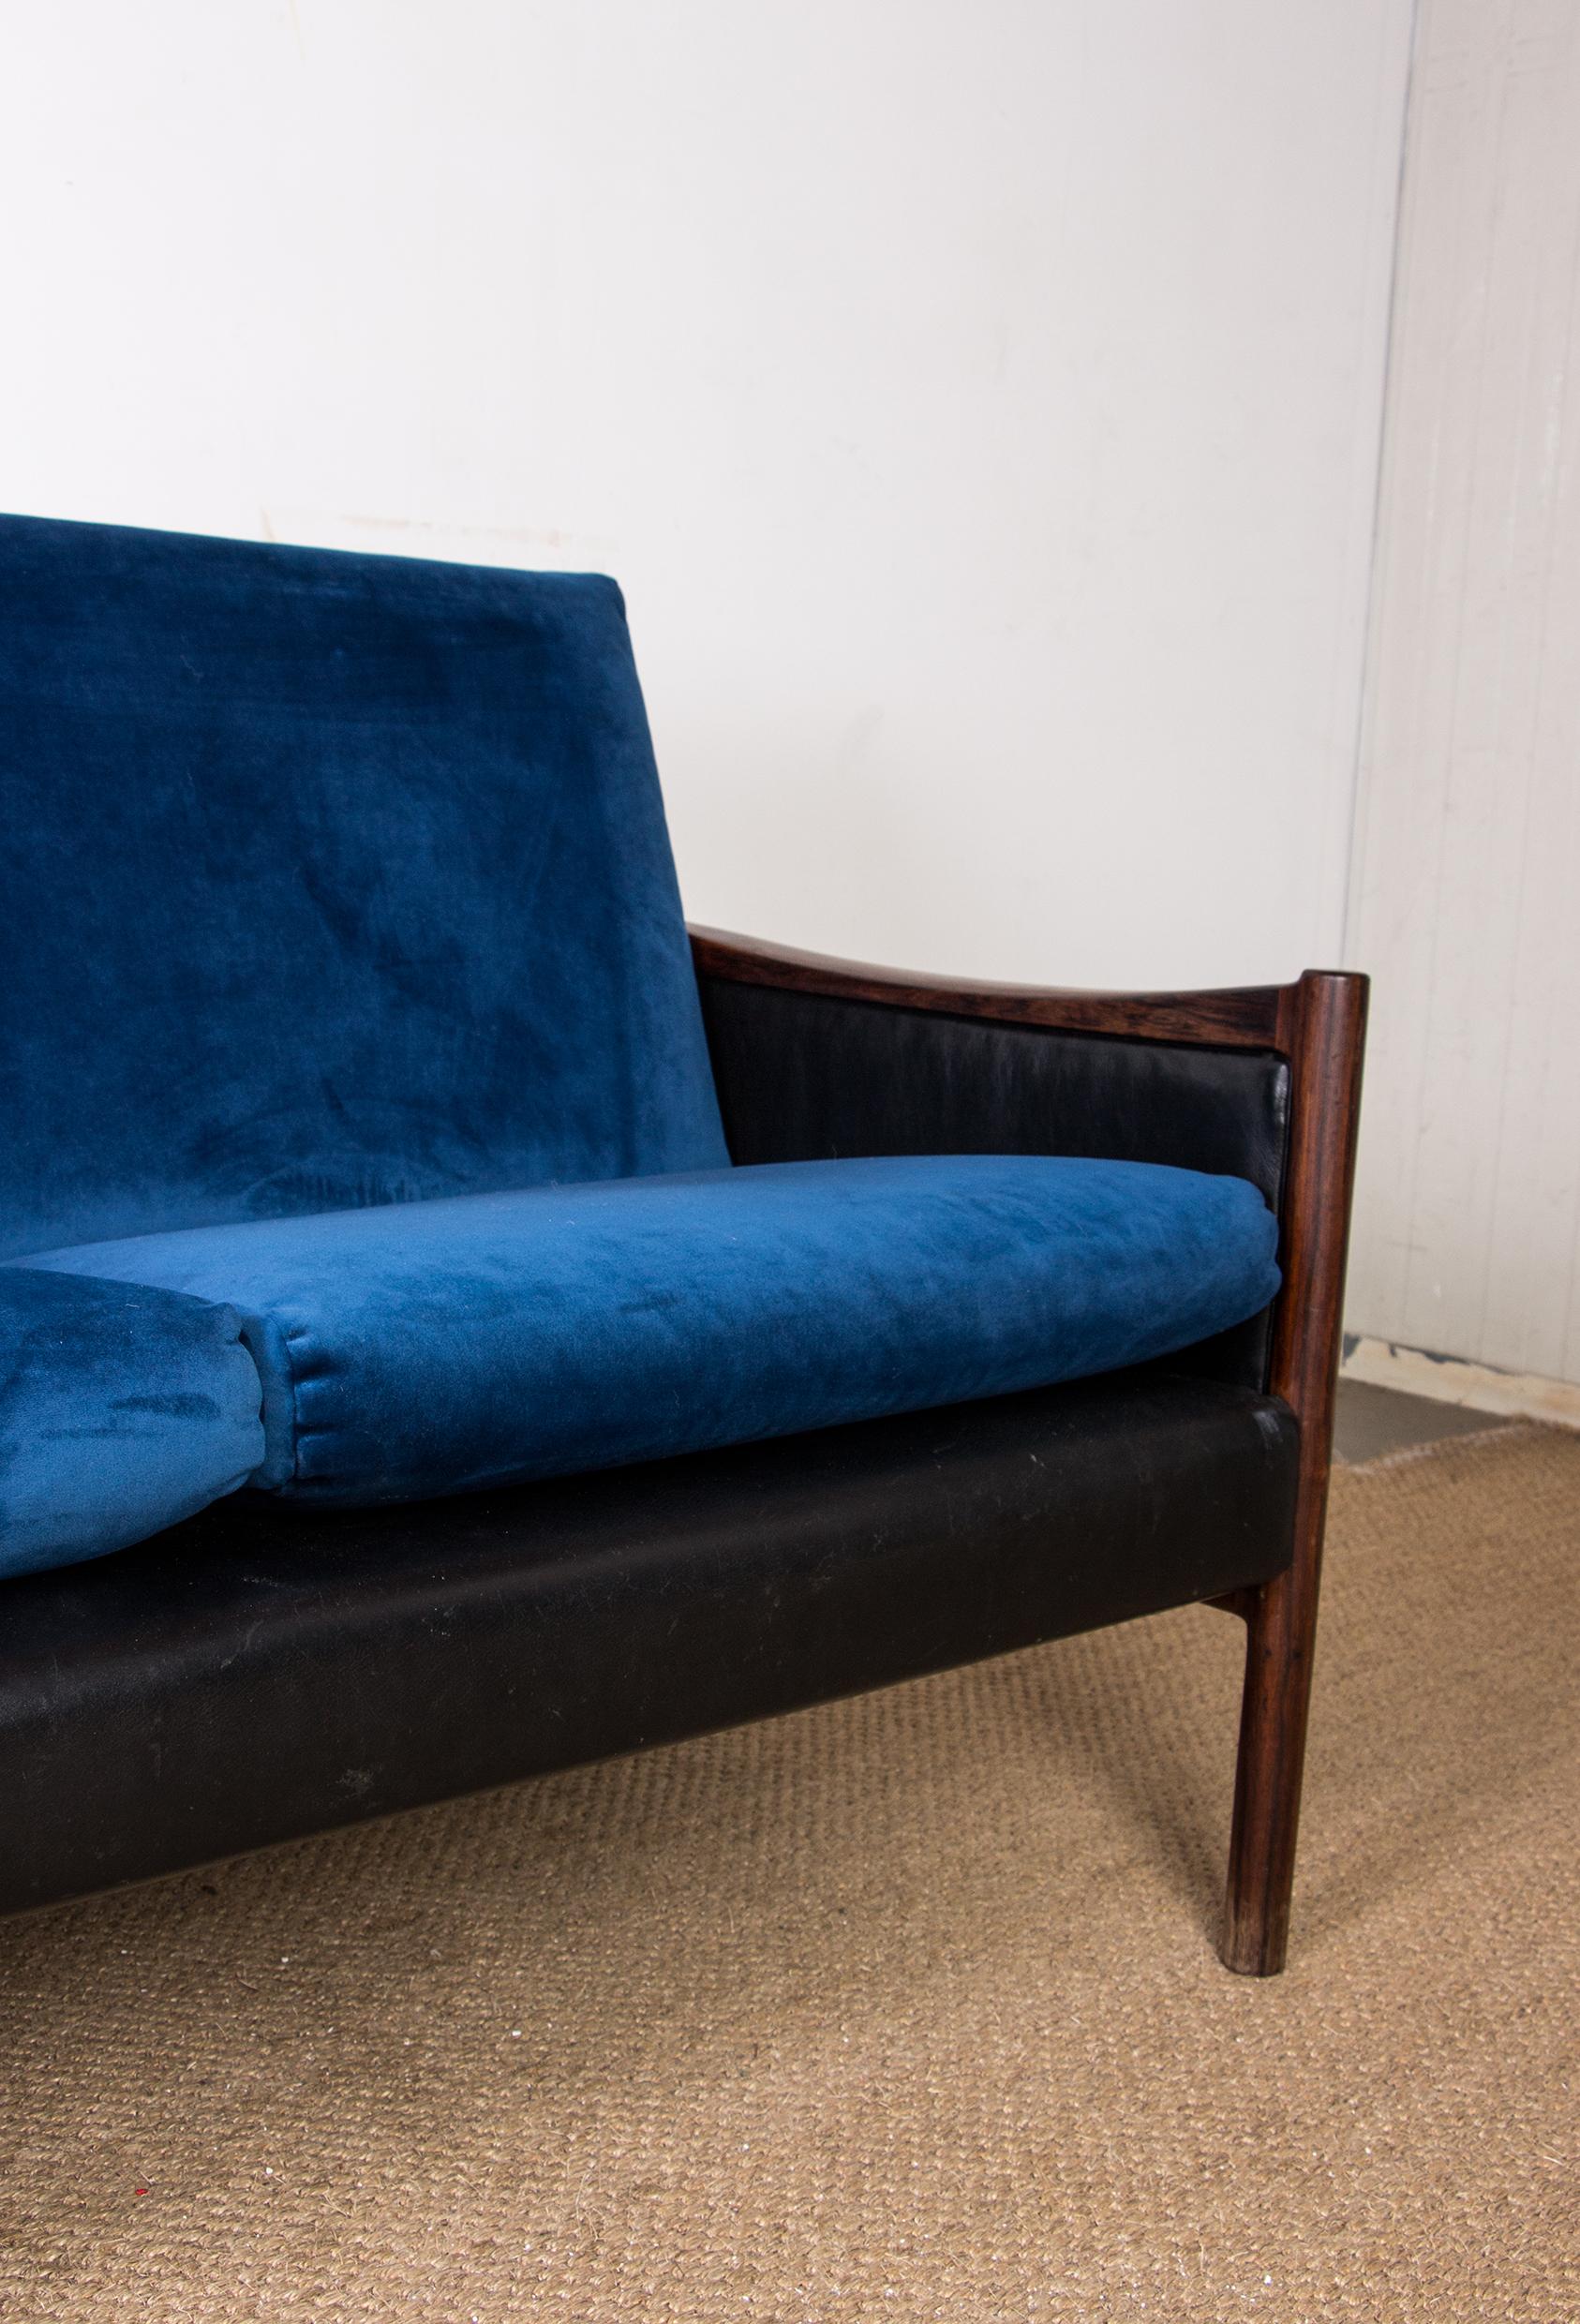 Magnificent Scandinavian sofa. Superb woodwork on the shoulders which are in full leather, seats and backrests in new petrol blue velvet which blends perfectly with the black of the leather. Furniture of very good quality, very comfortable with a